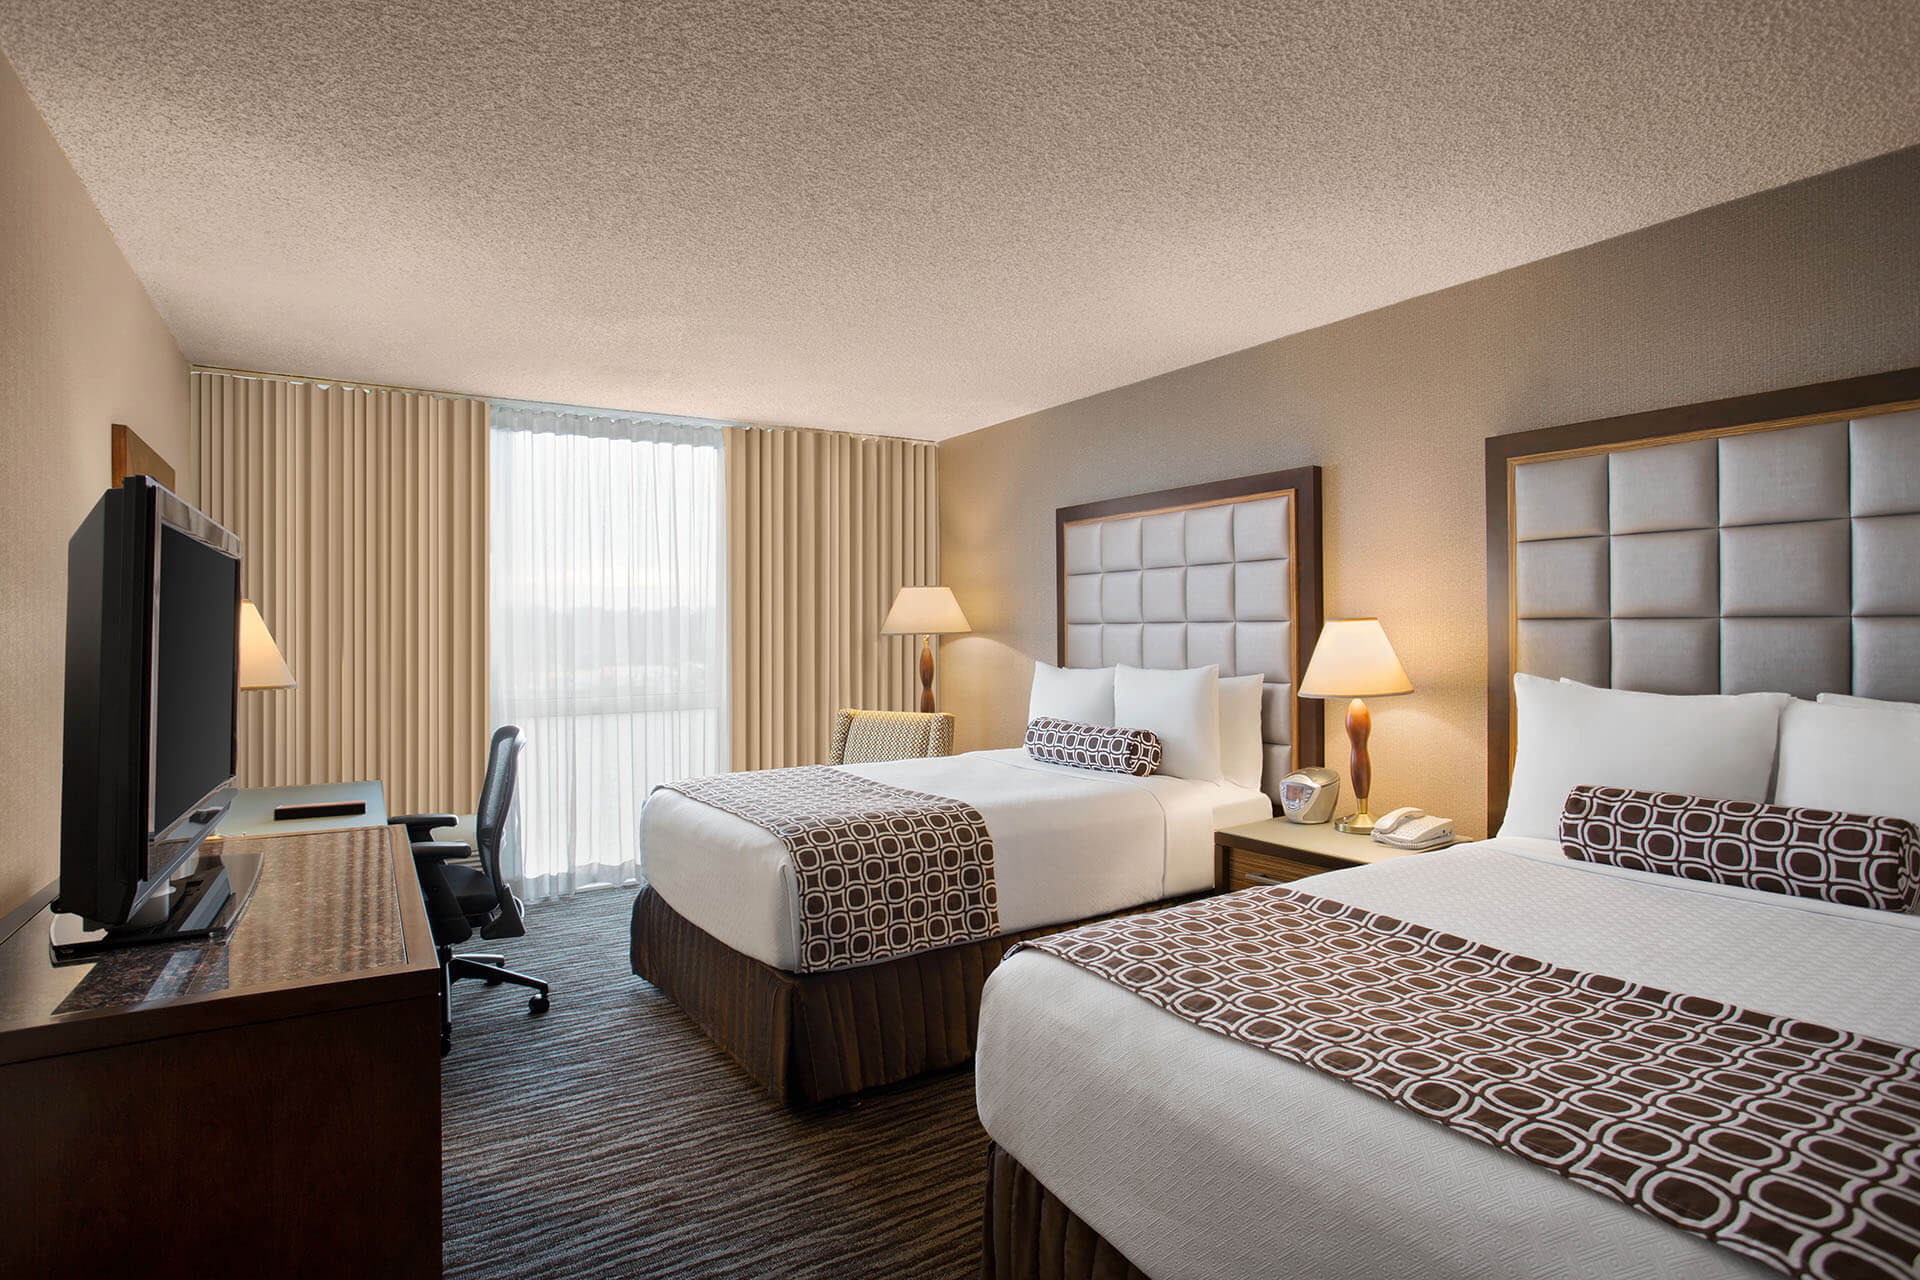 Guest bed room with two double beds at the Crowne Plaza San Francisco Airport.